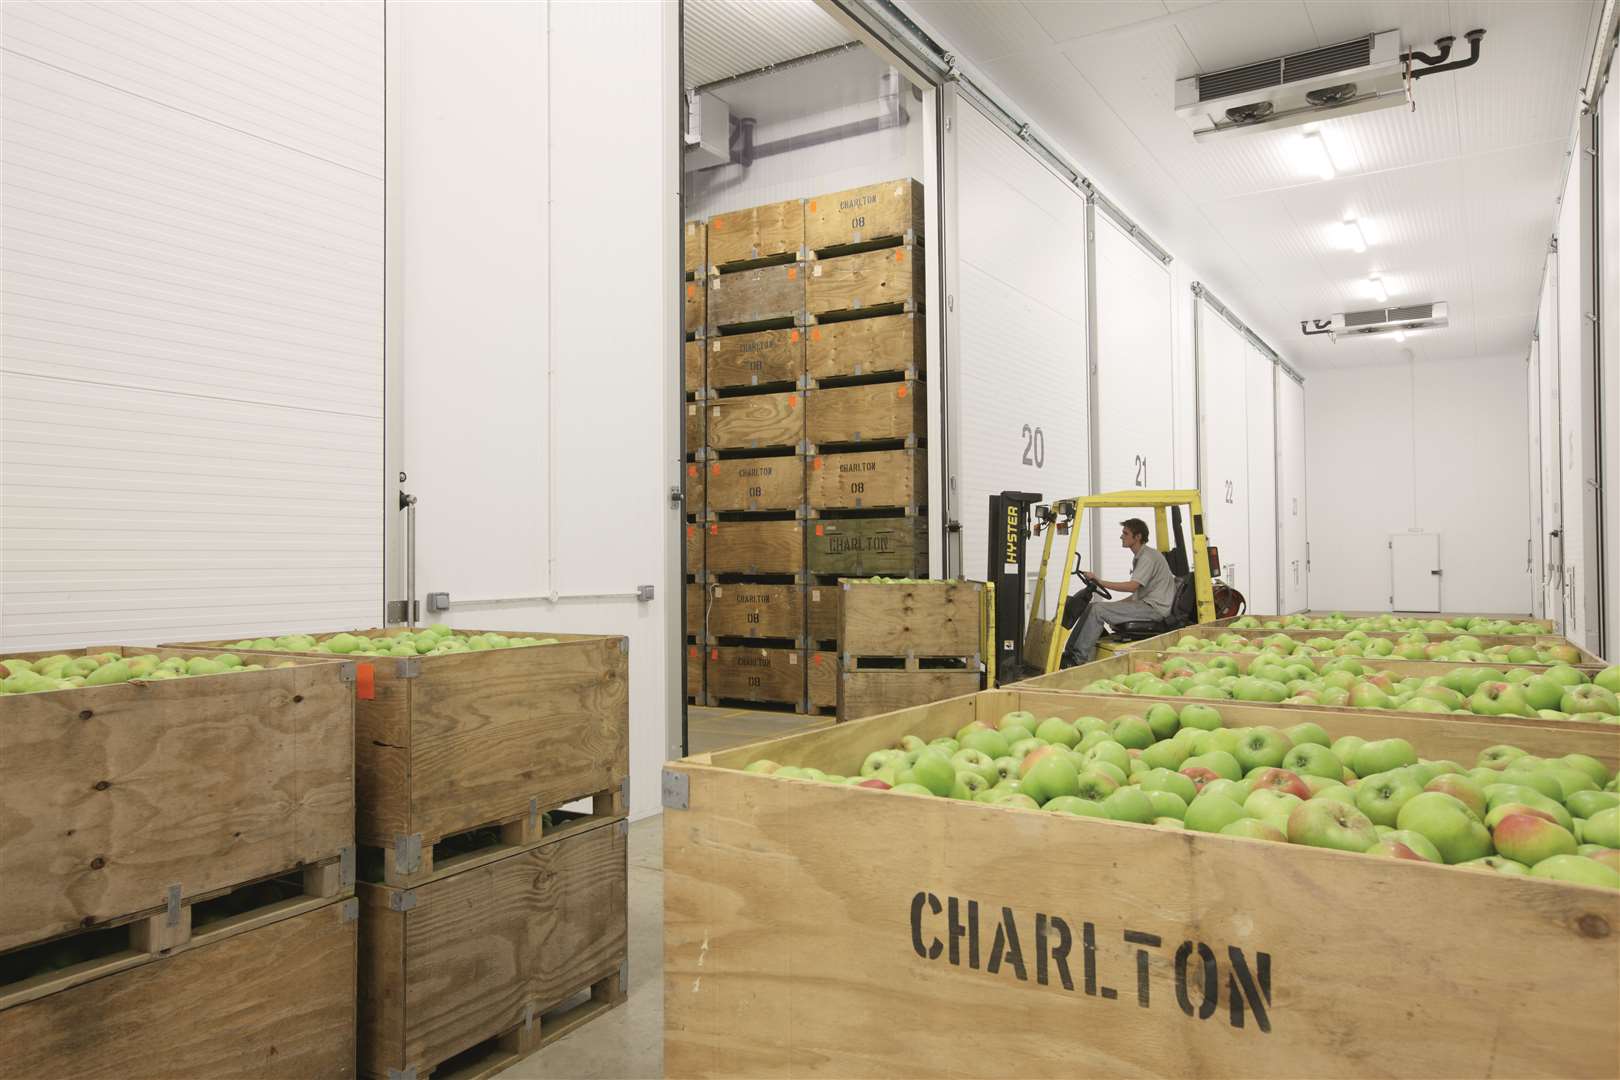 Paddock Wood-based ICA Group installed temperature-controlled and cold storage facilities